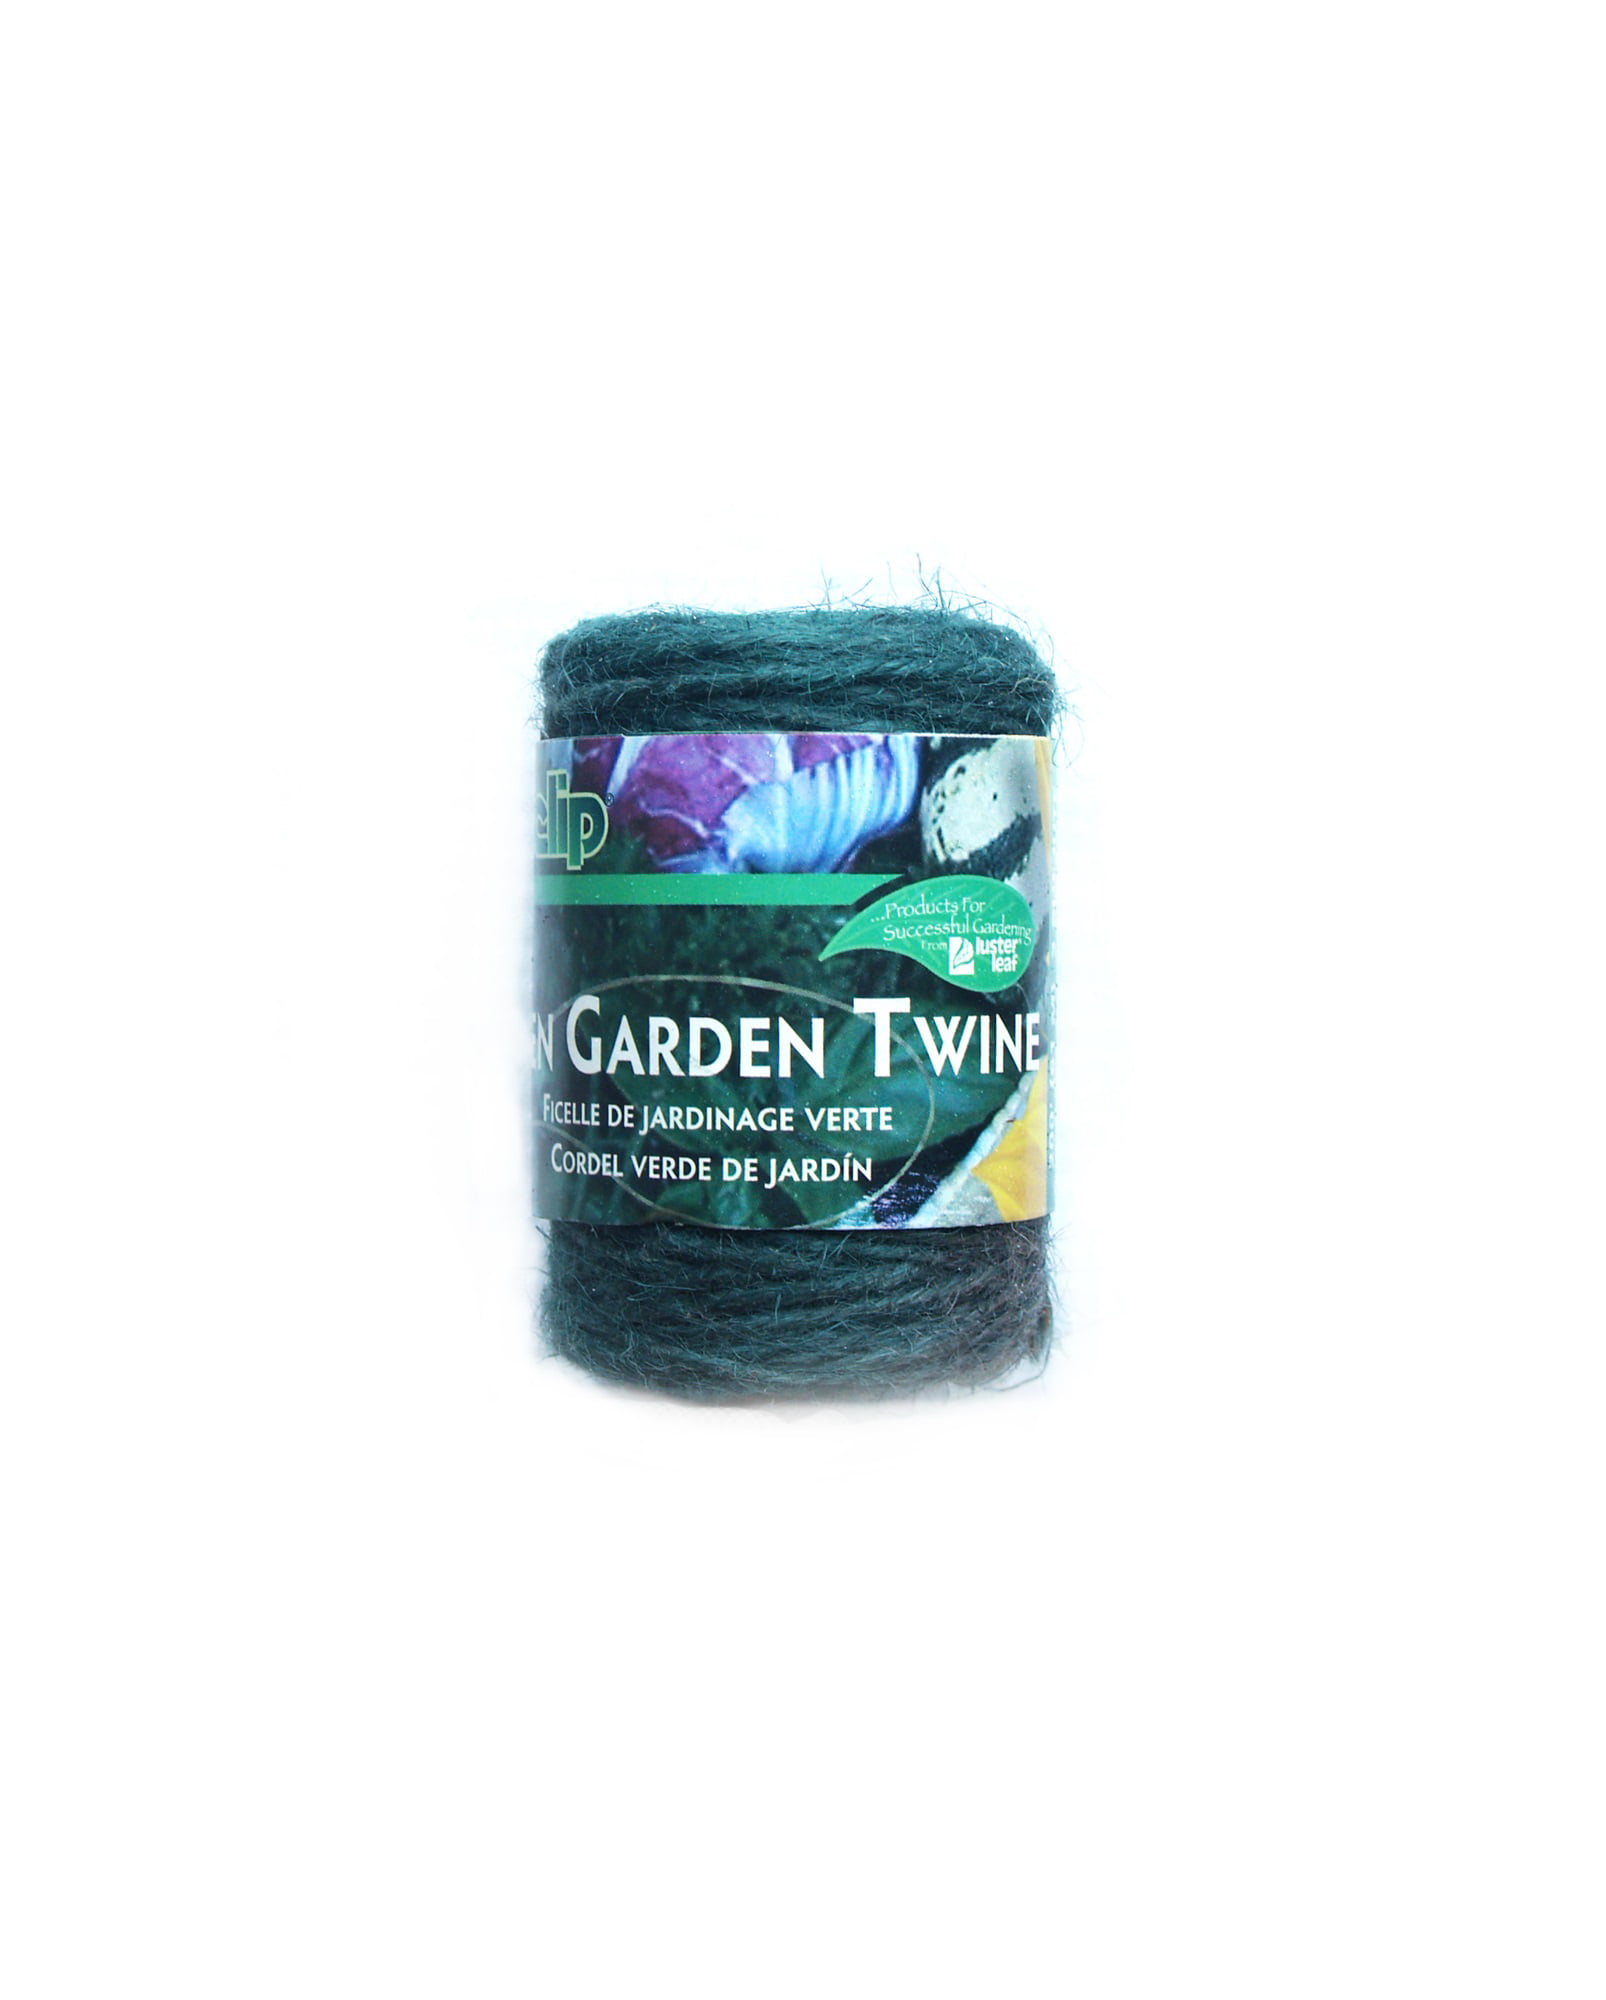 Luster Leaf 874 Rapiclip 3-Ply Jute Natural Garden Twine 200 ft. Pack of 12 